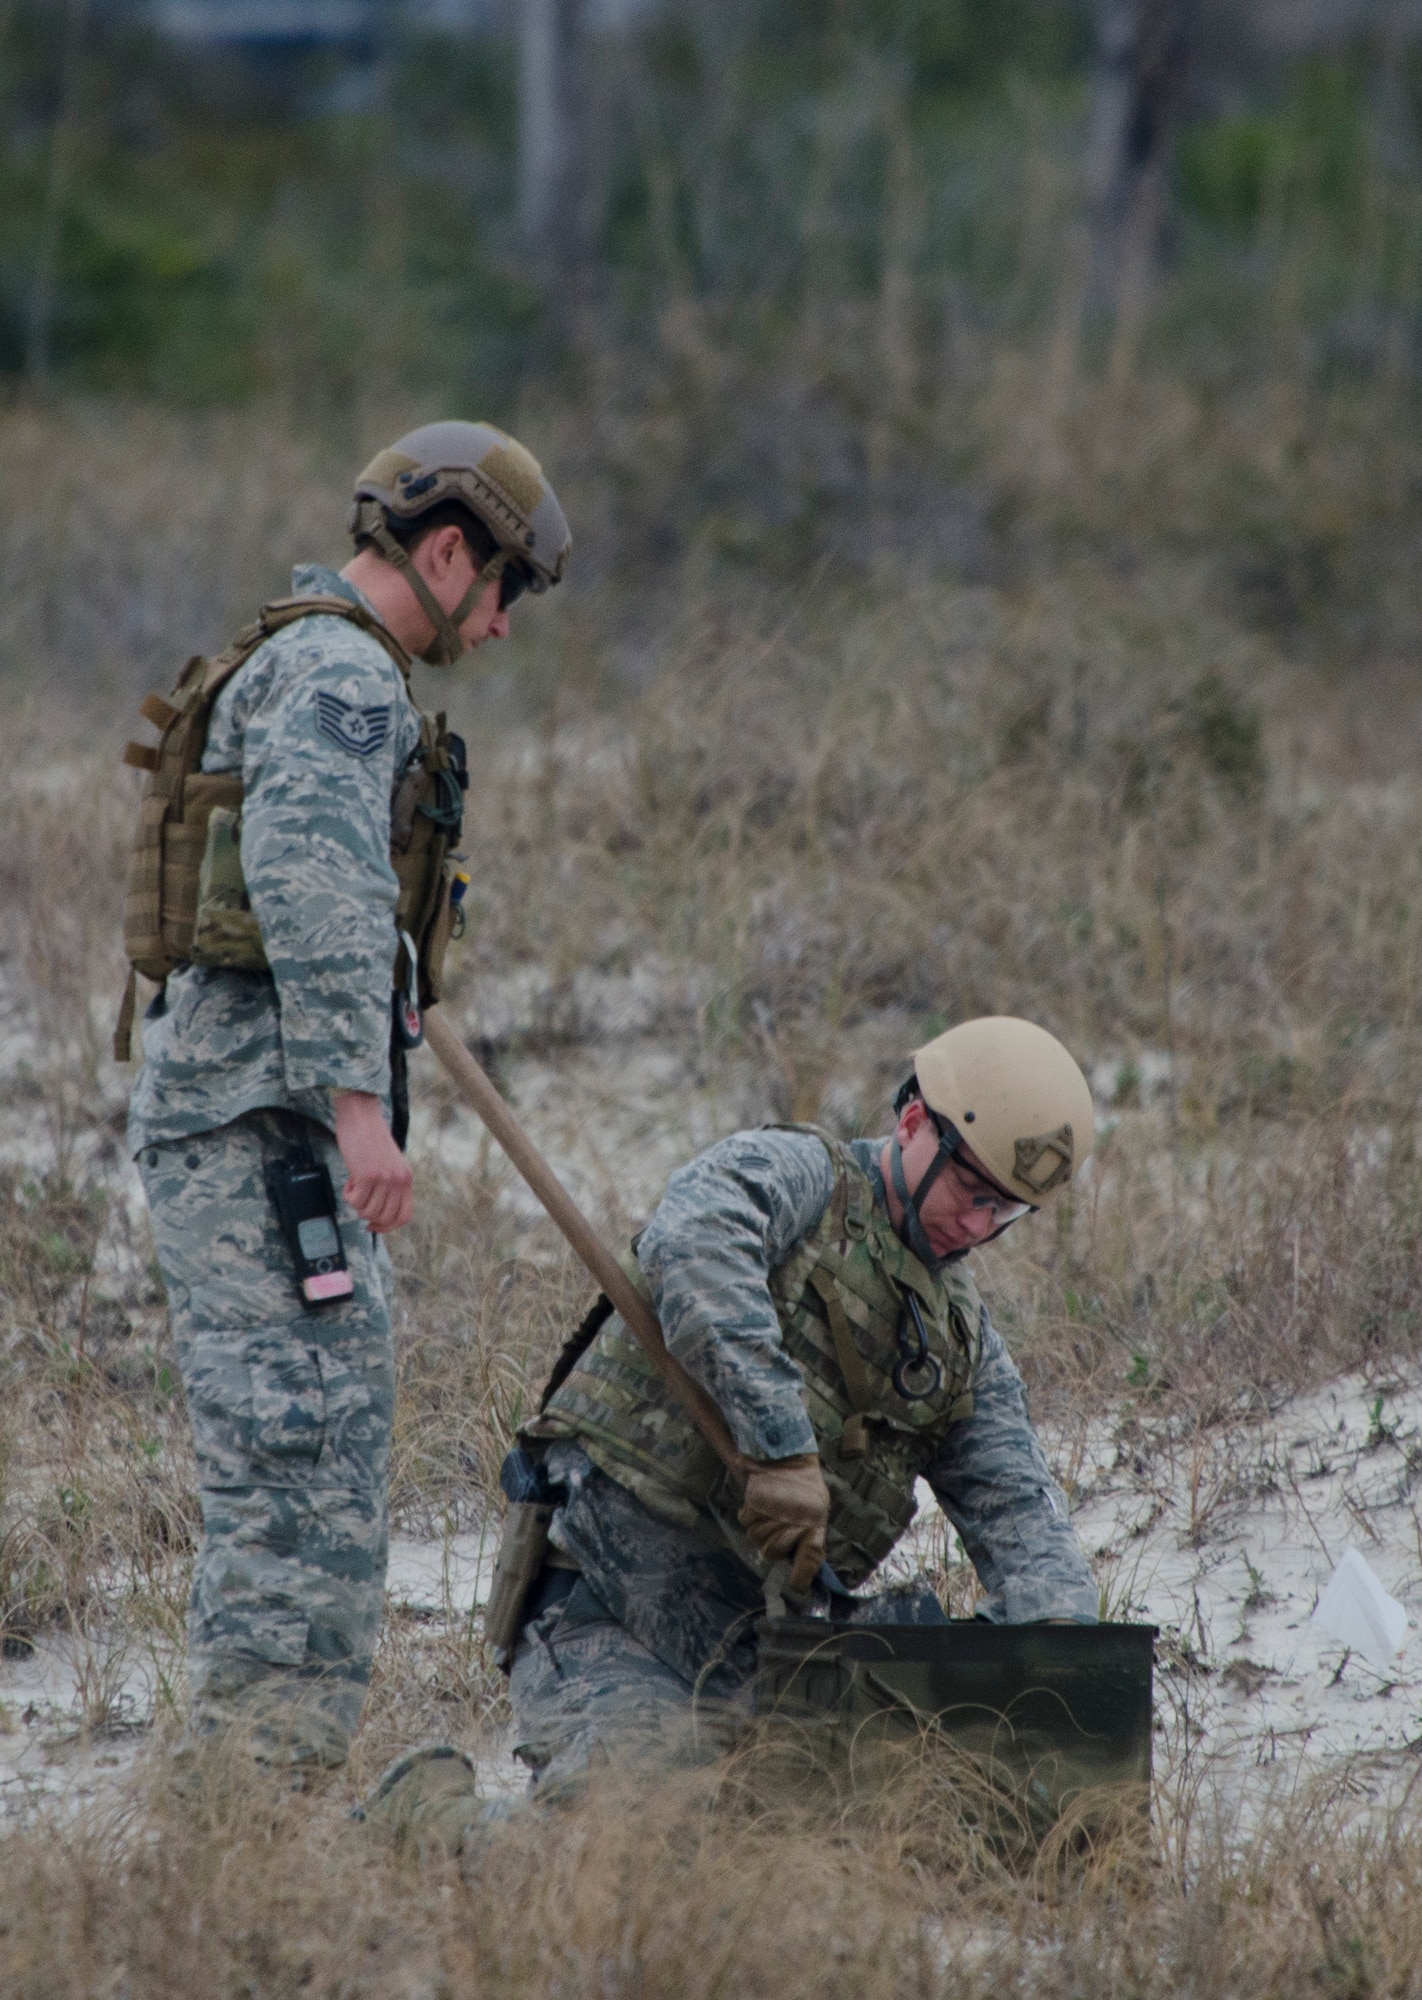 Tech. Sgt. Brian Dunnagan, 1st Special Operations Civil Engineer Squadron explosive ordnance disposal craftsman, and Senior Airman Christopher Dolan, 919th Special Operations Squadron explosive ordnance journeyman, place an unexploded ordnance into an ammo can at Perdido Key, Fla., March 12, 2014. EOD Airmen used C4 to dispose of an unexploded ordnances.  (U.S. Air Force photo/Staff Sgt. John Bainter)